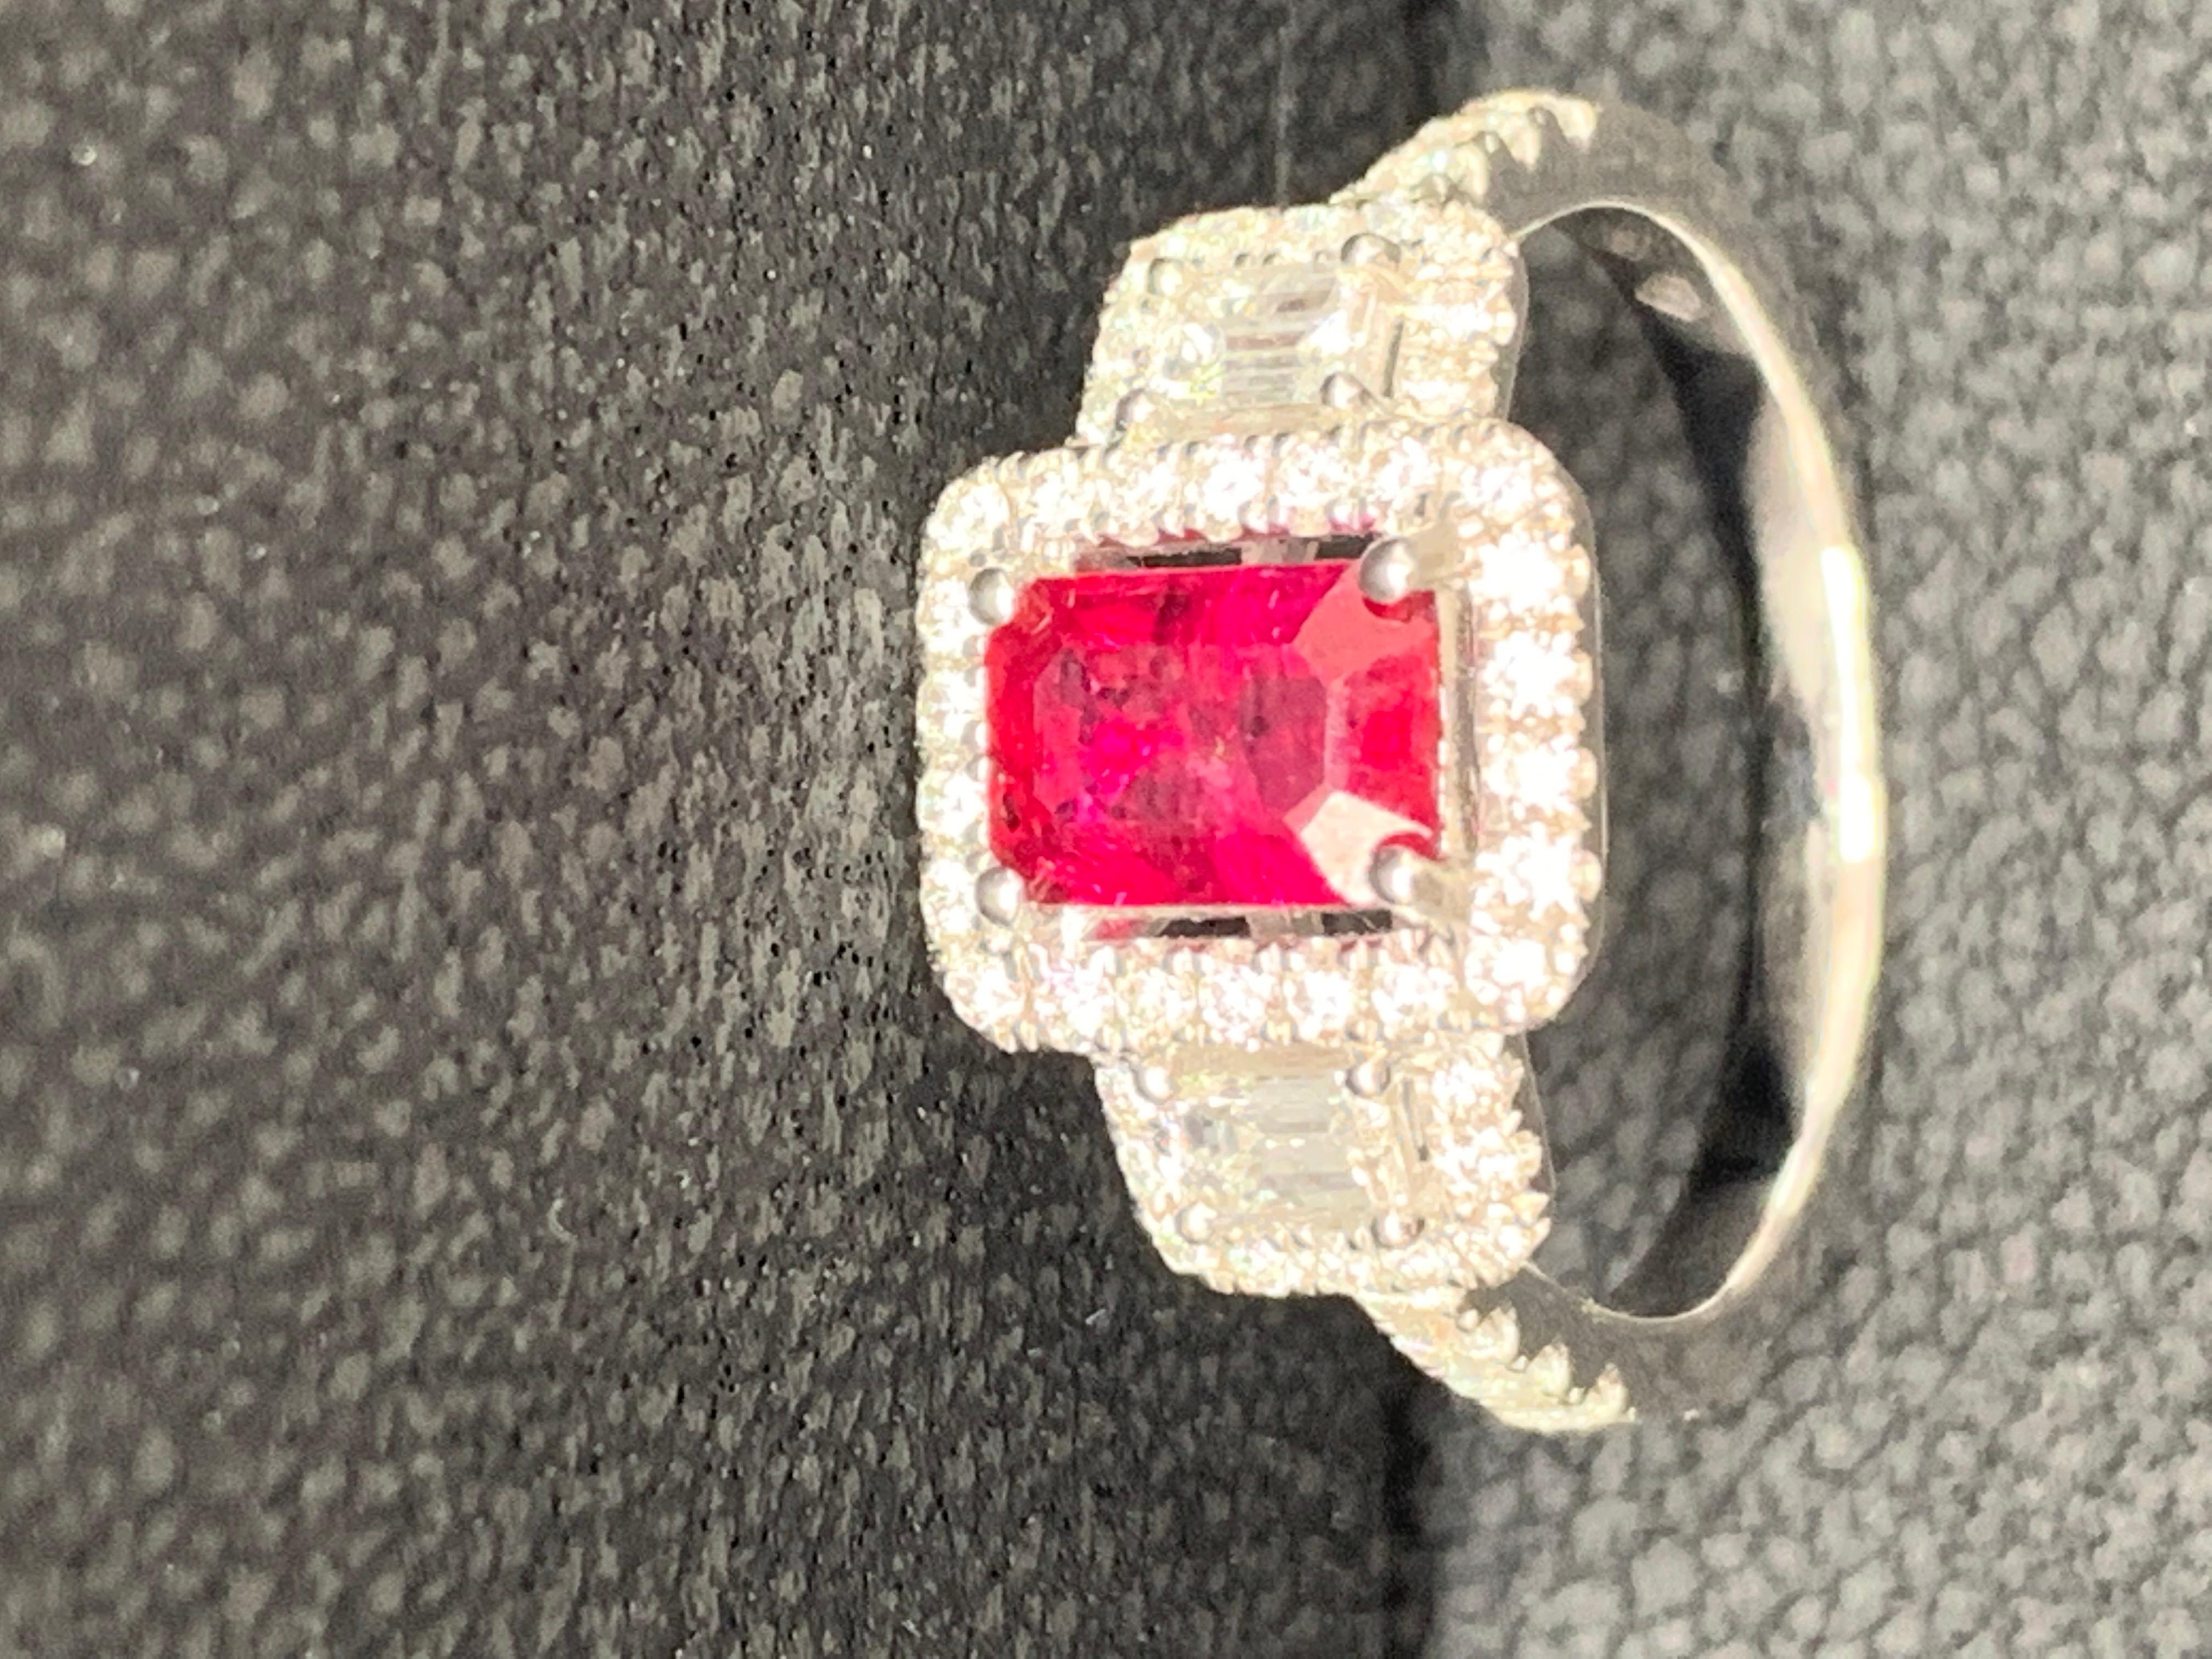 0.85 Carat Emerald Cut Ruby Diamond Engagement Ring in 18K White Gold For Sale 6